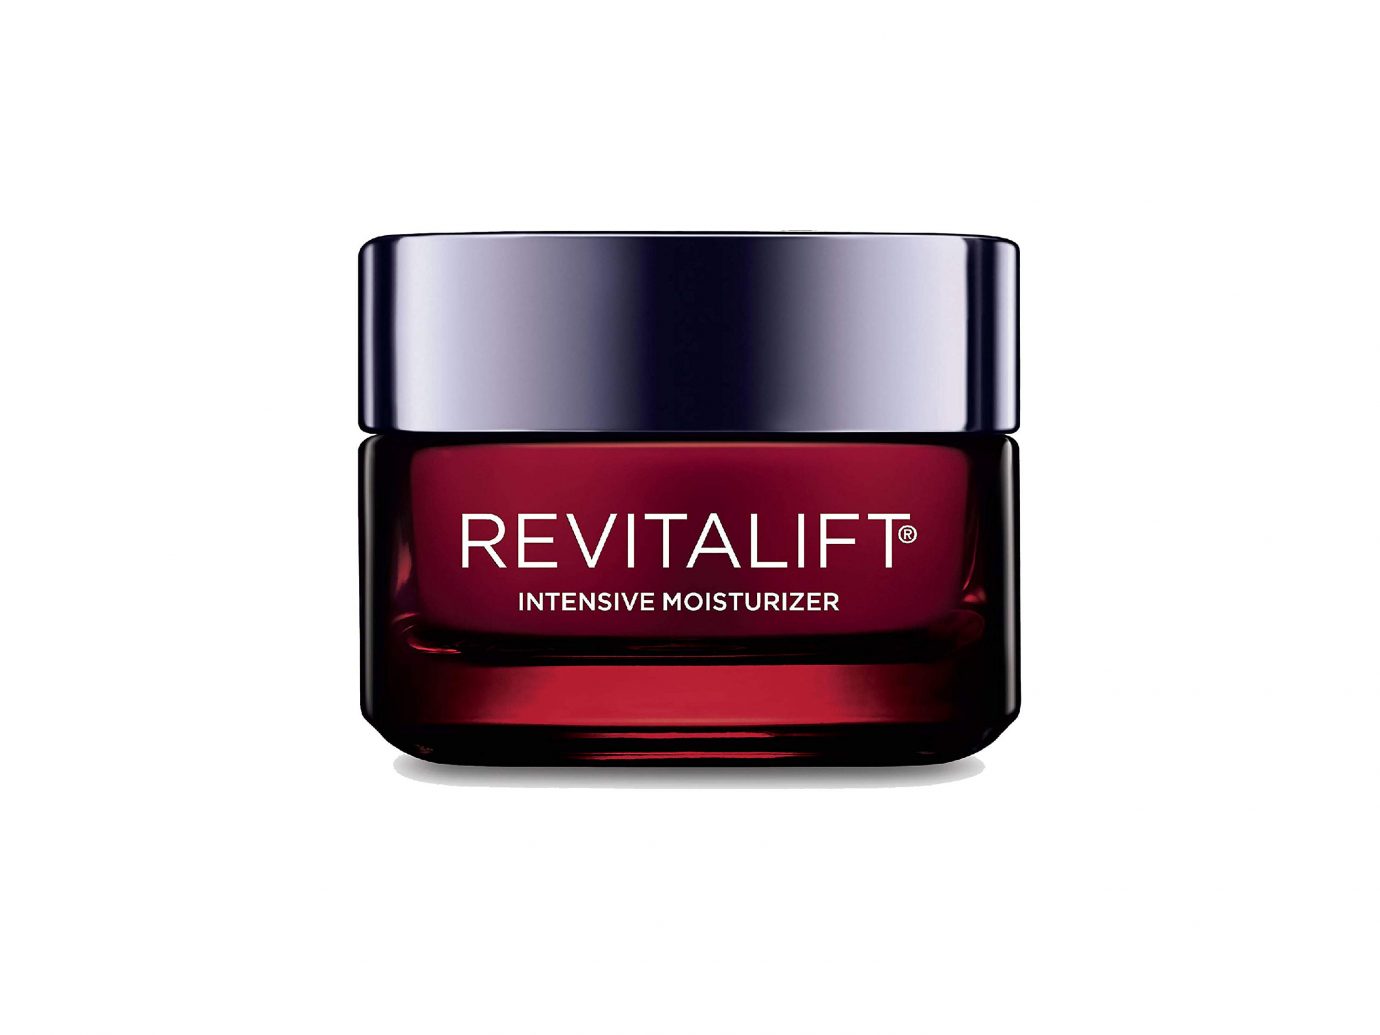 Face Moisturizer by L’Oreal Paris, Revitalift Triple Power Intensive Day Cream with Hyaluronic Acid for Visibly Reduced Wrinkles and Firm Skin